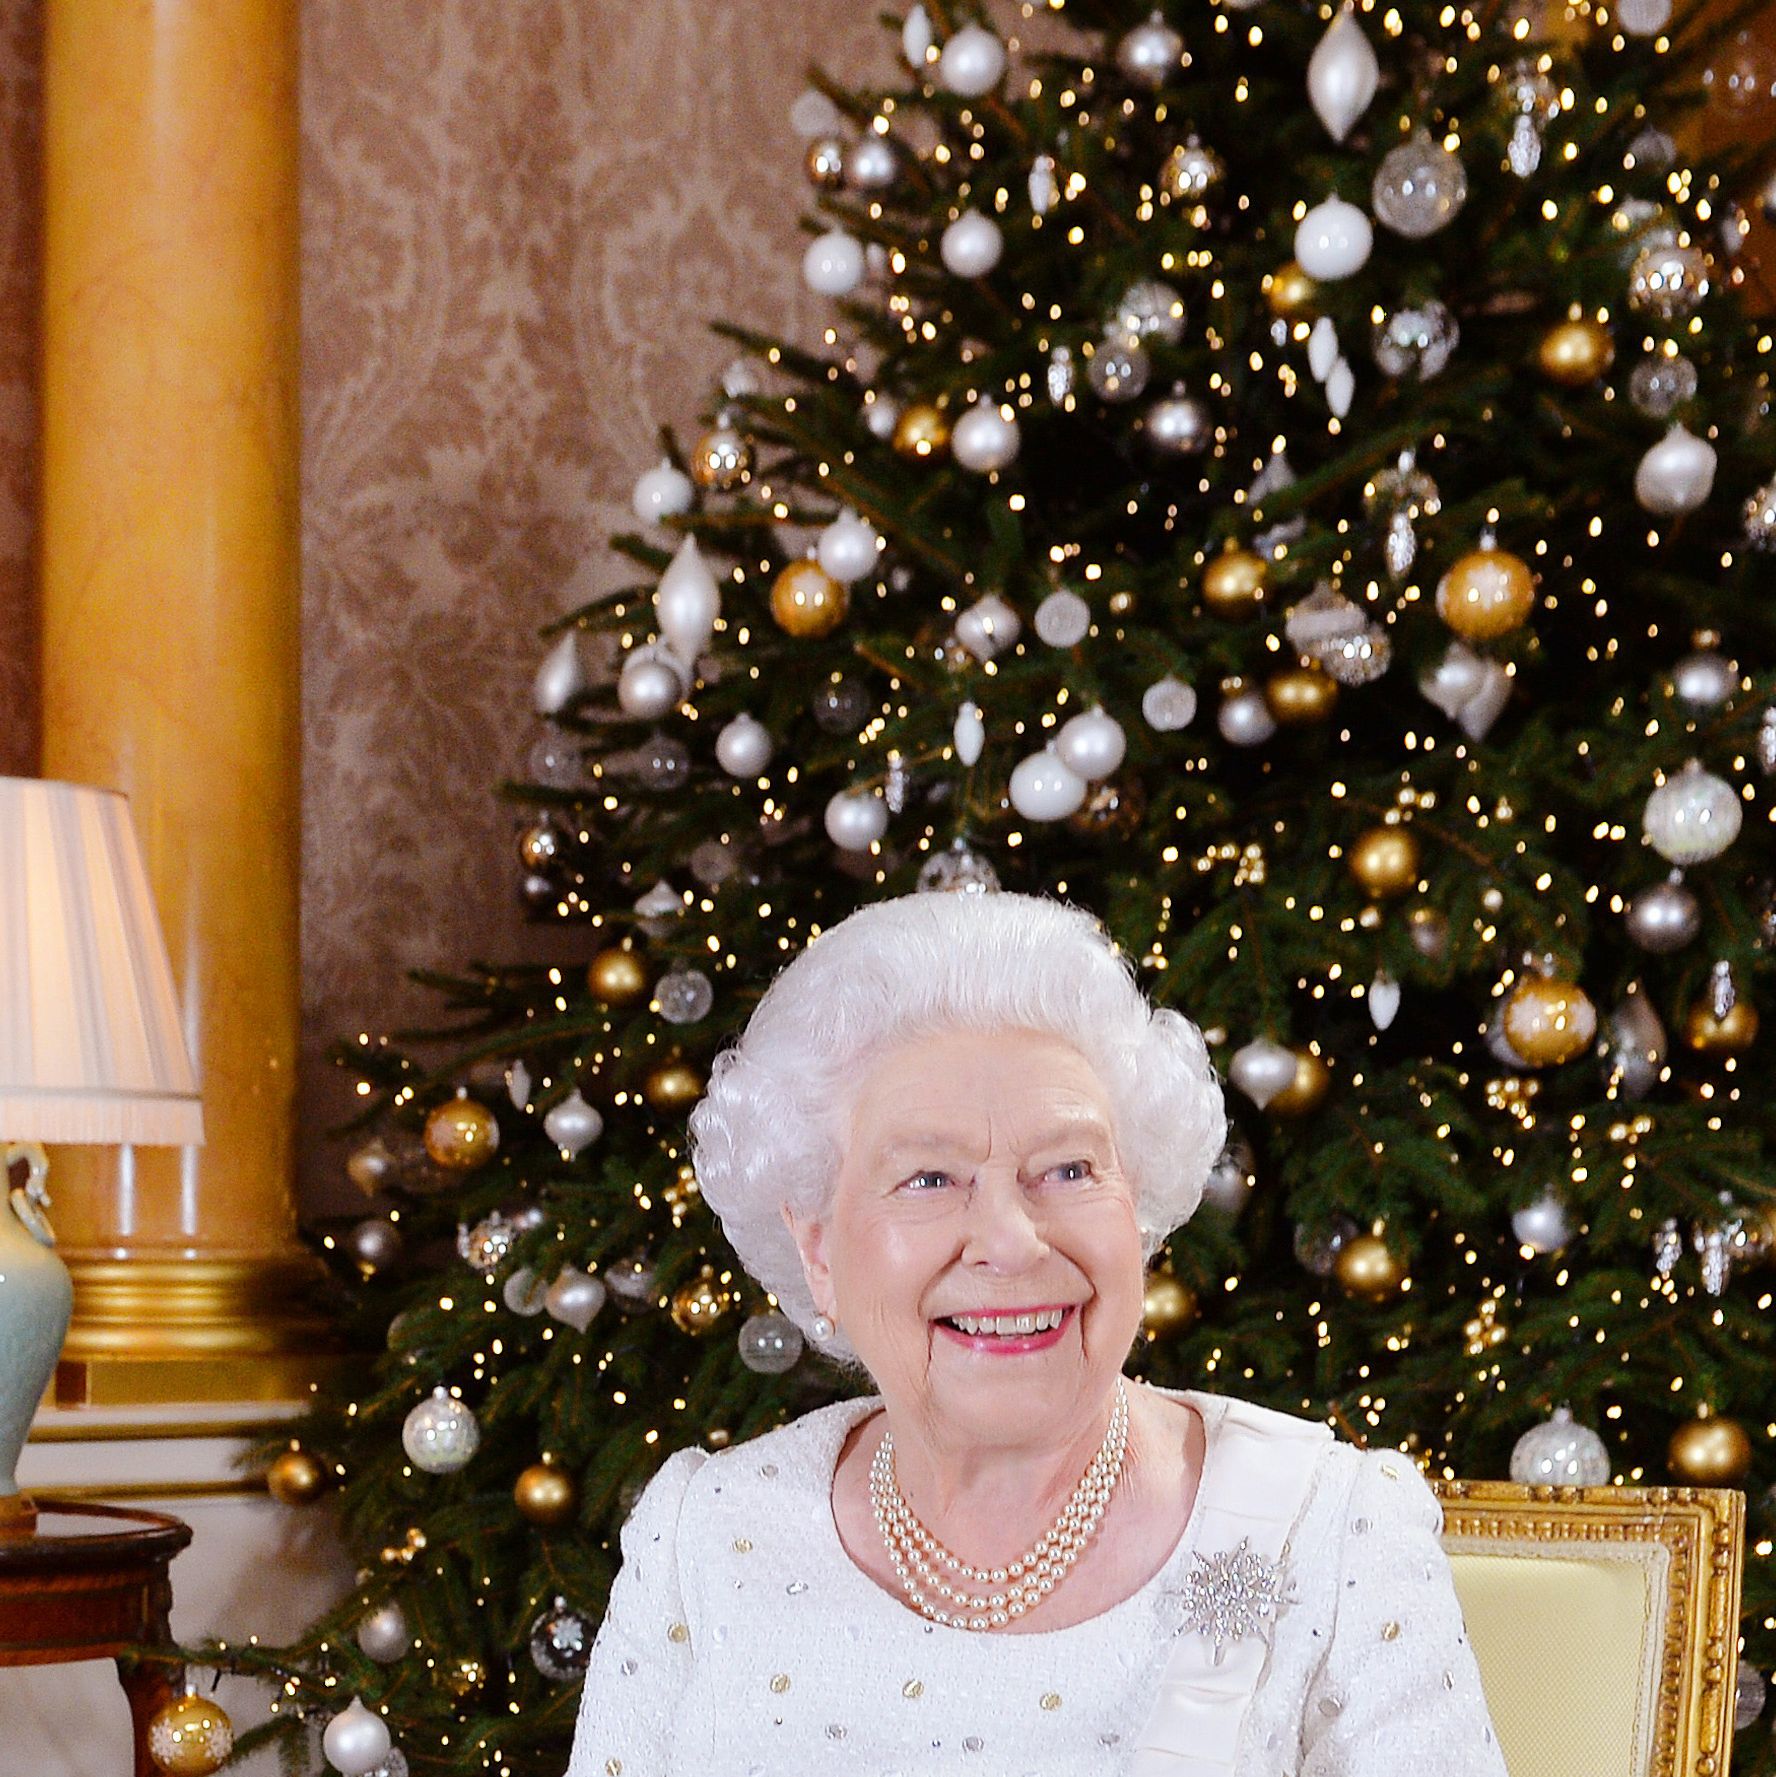 The Queen\'s Christmas trees and decorations are extra festive